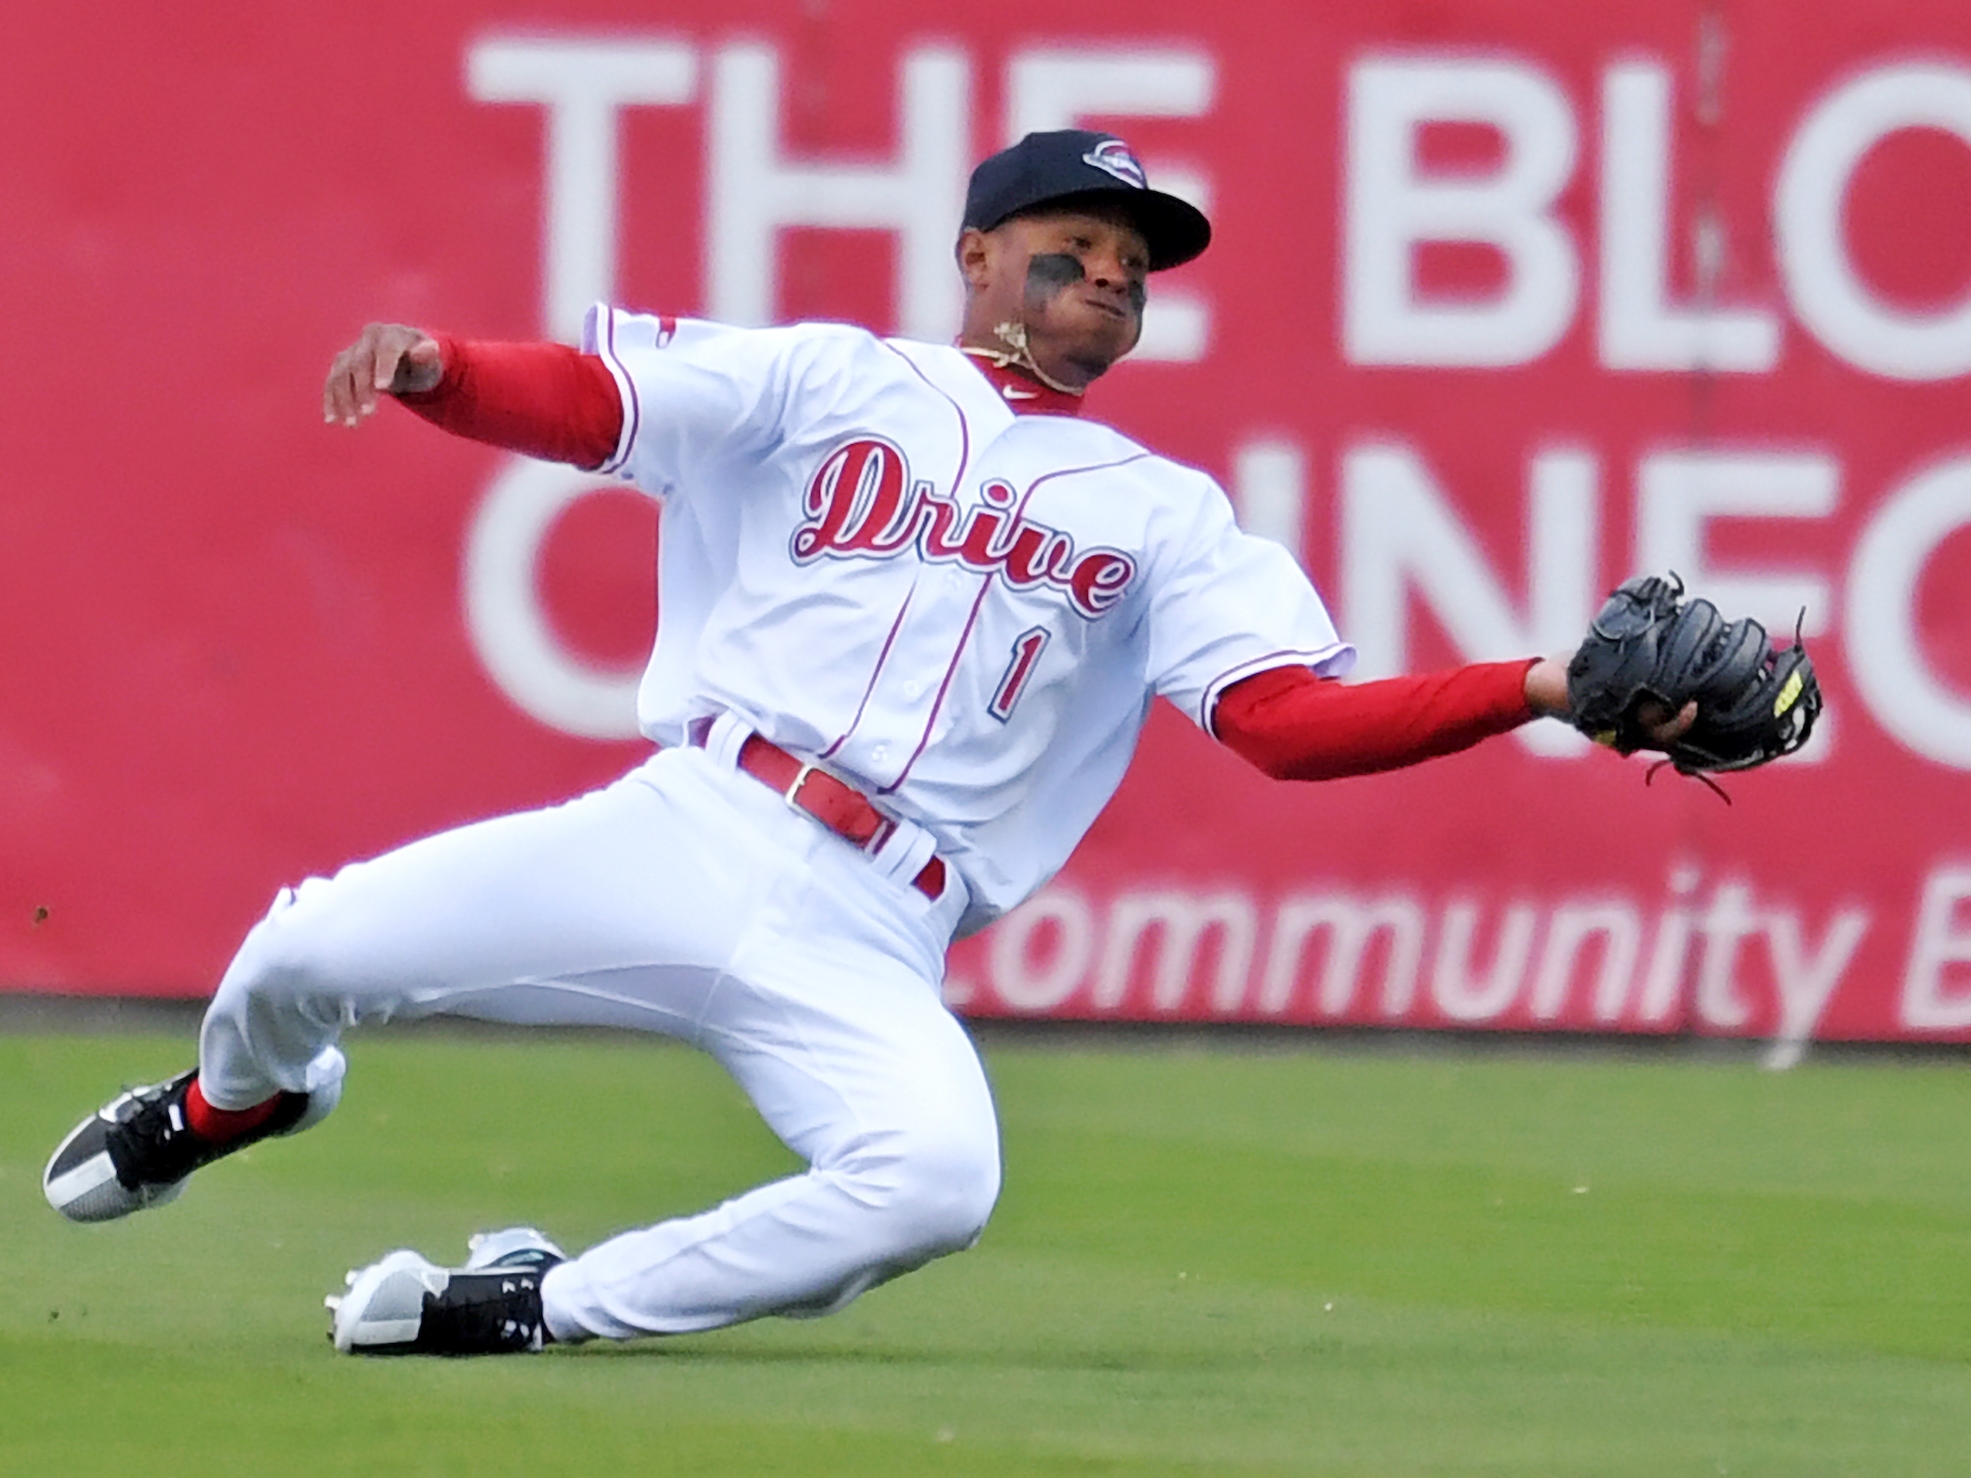 Marcelo Mayer is the biggest Red Sox prospect to hit Portland in a decade.  Catch him while you can. – The Portland Phoenix